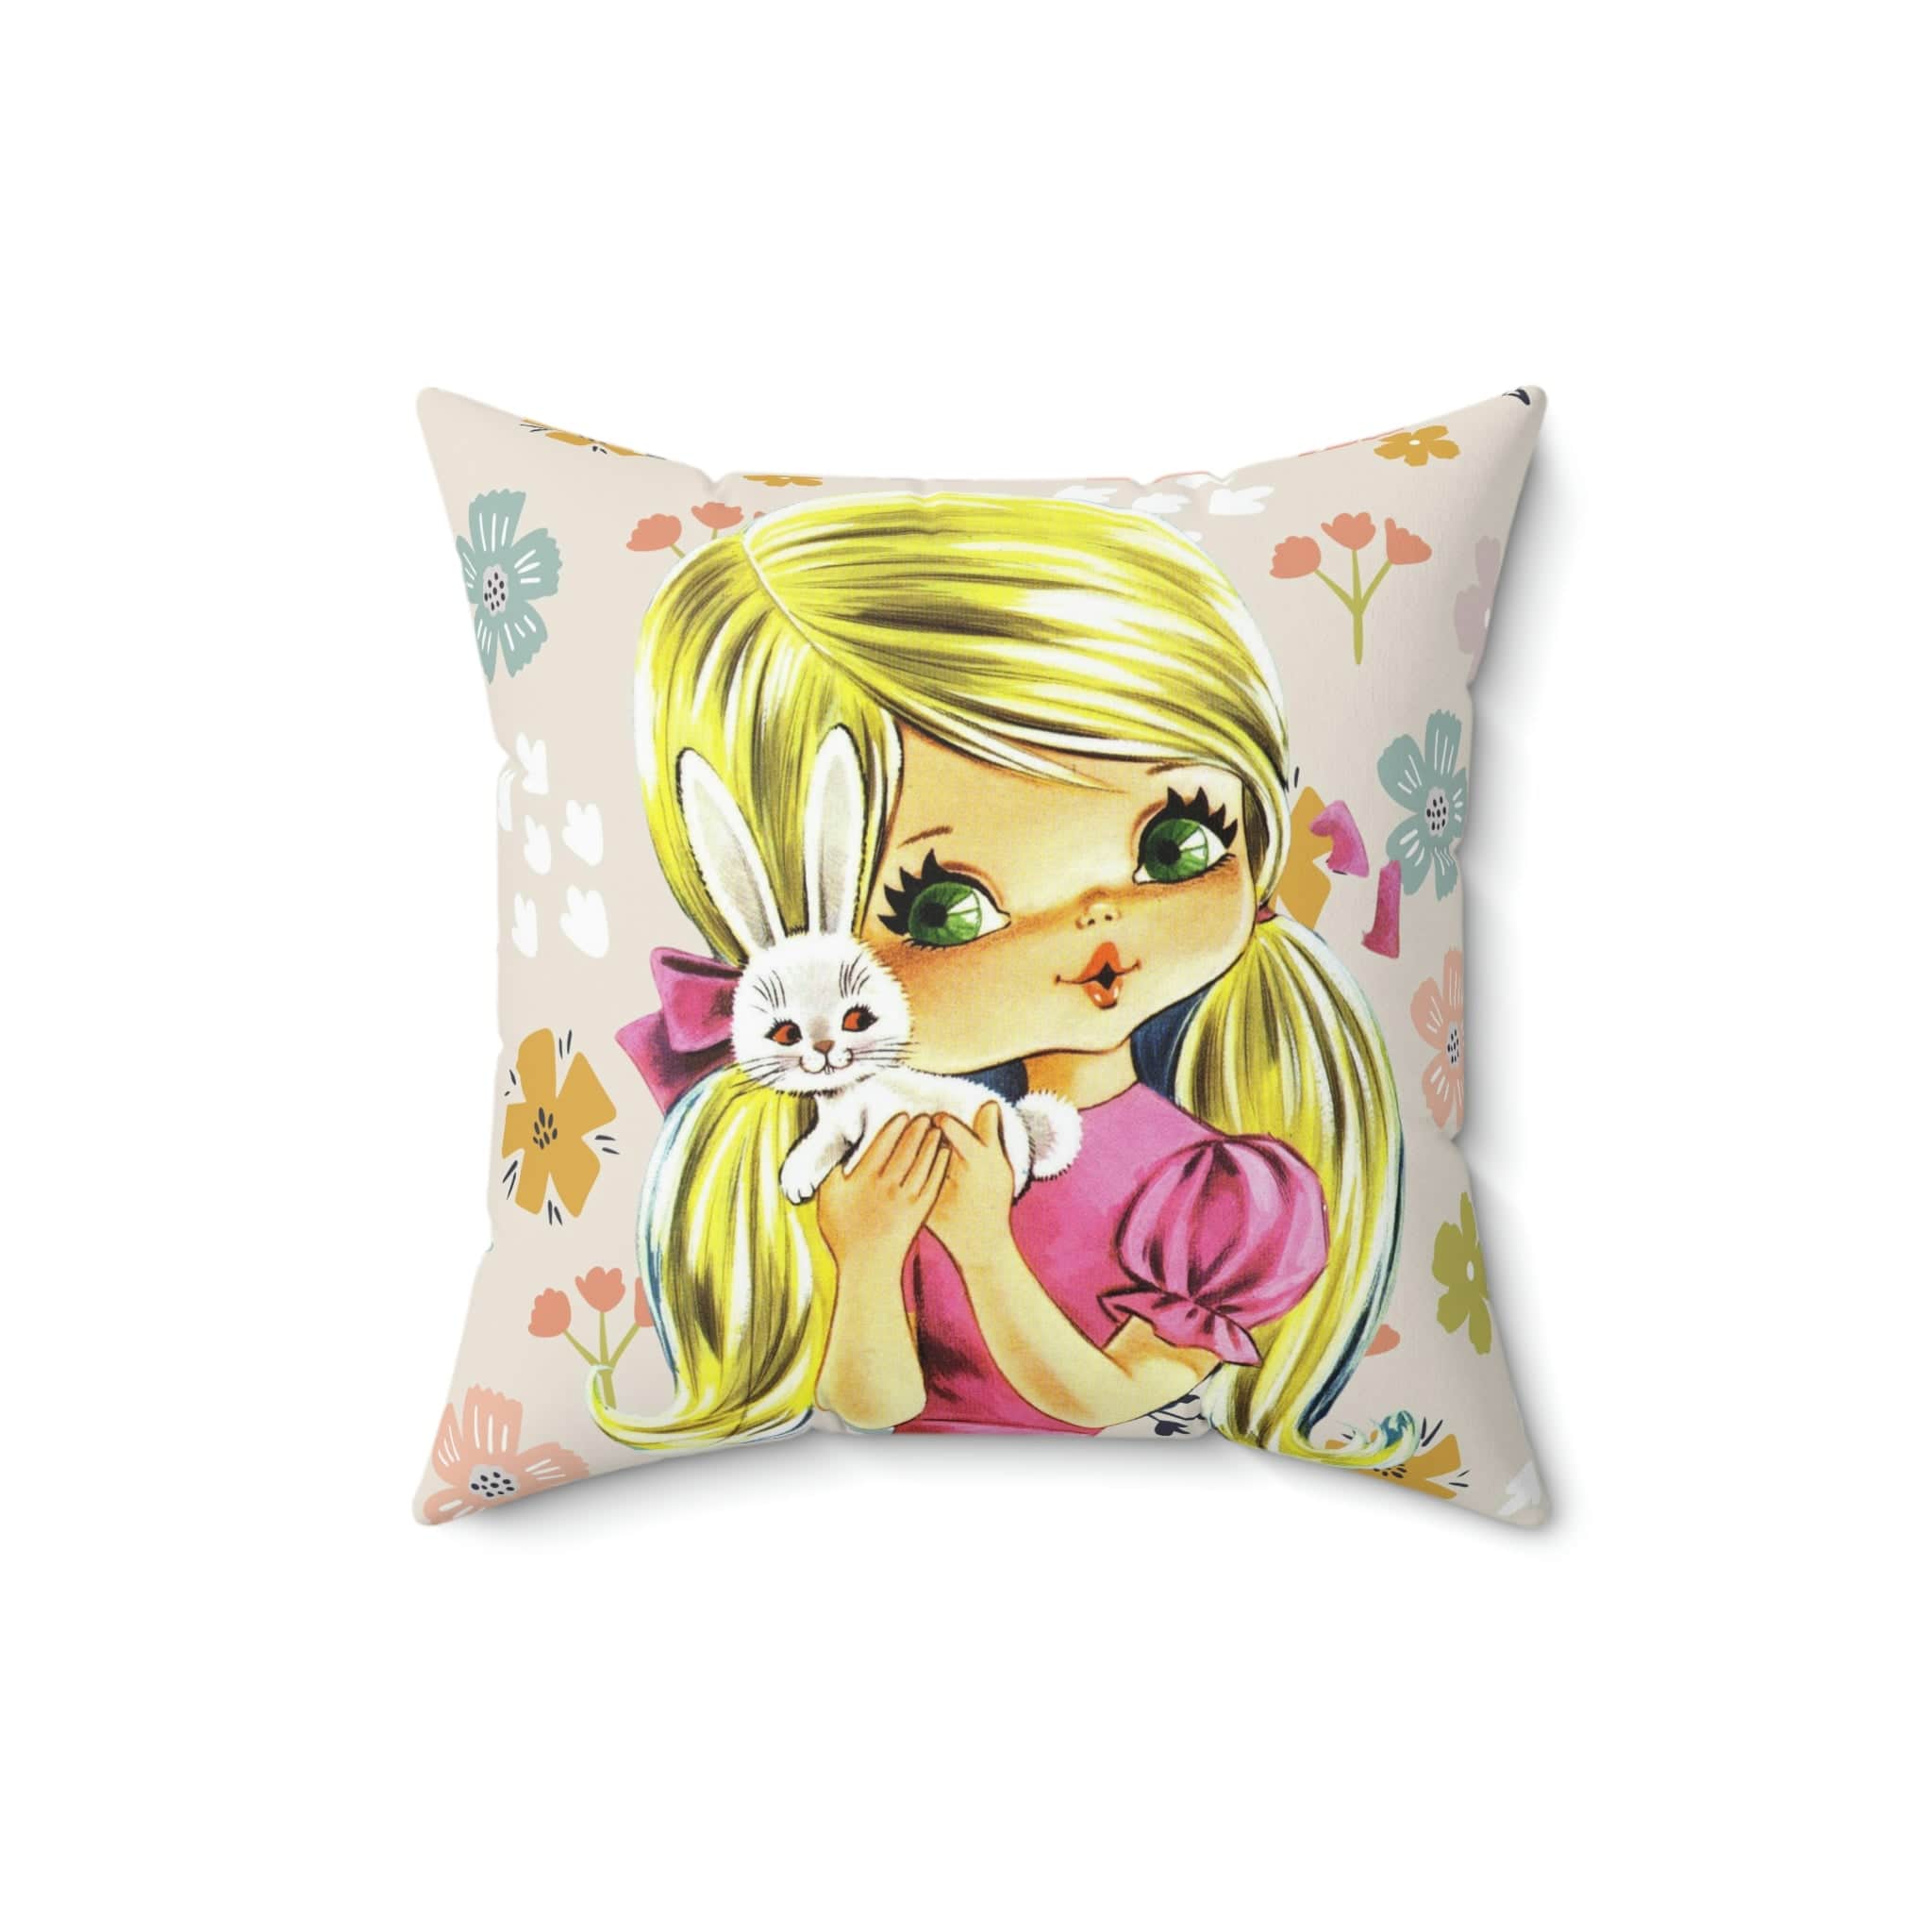 Art Pillows From Kitsch To Classic